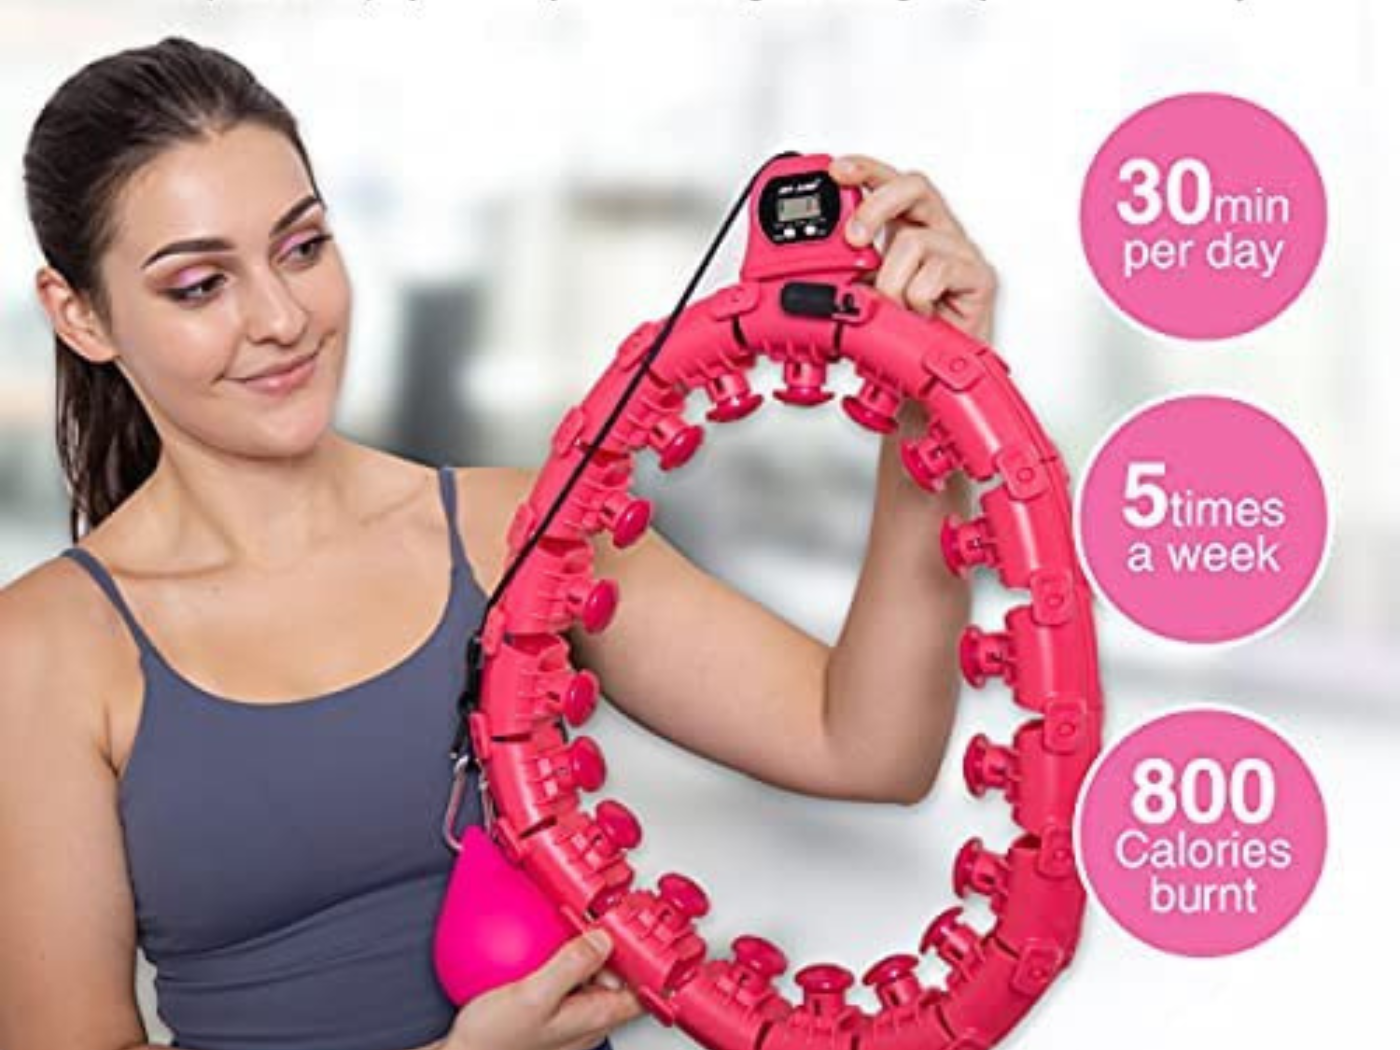 Can You Lose Weight Hula Hooping